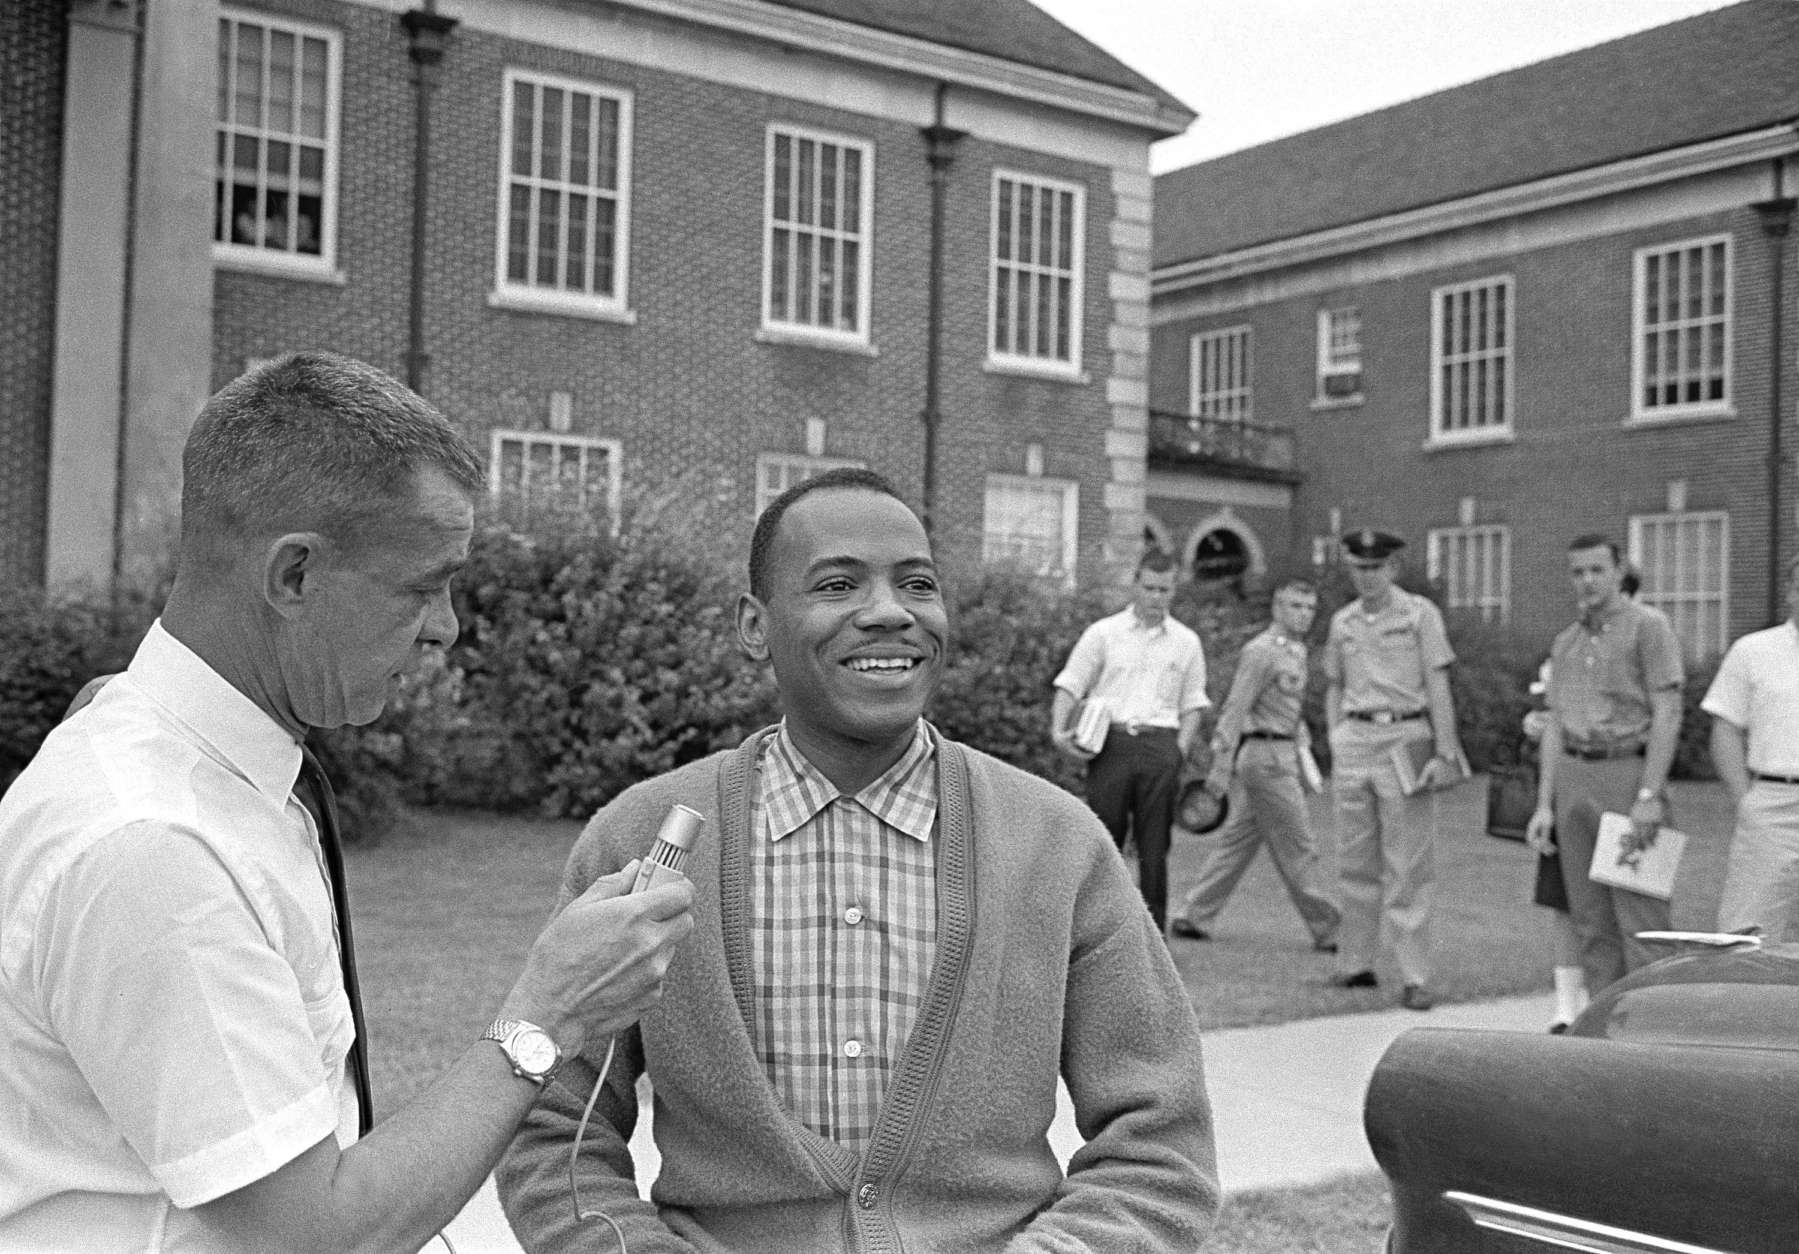 African American James H. Meredith grins as he answers a question at an impromptu conference between classes at the University of Mississippi in Oxford, Miss., on Oct. 11, 1962. Meredith, who integrated Ole Miss, walked from class to class this morning alone. Students gathered in small groups but were silent. (AP Photo/Jim Bourdier)